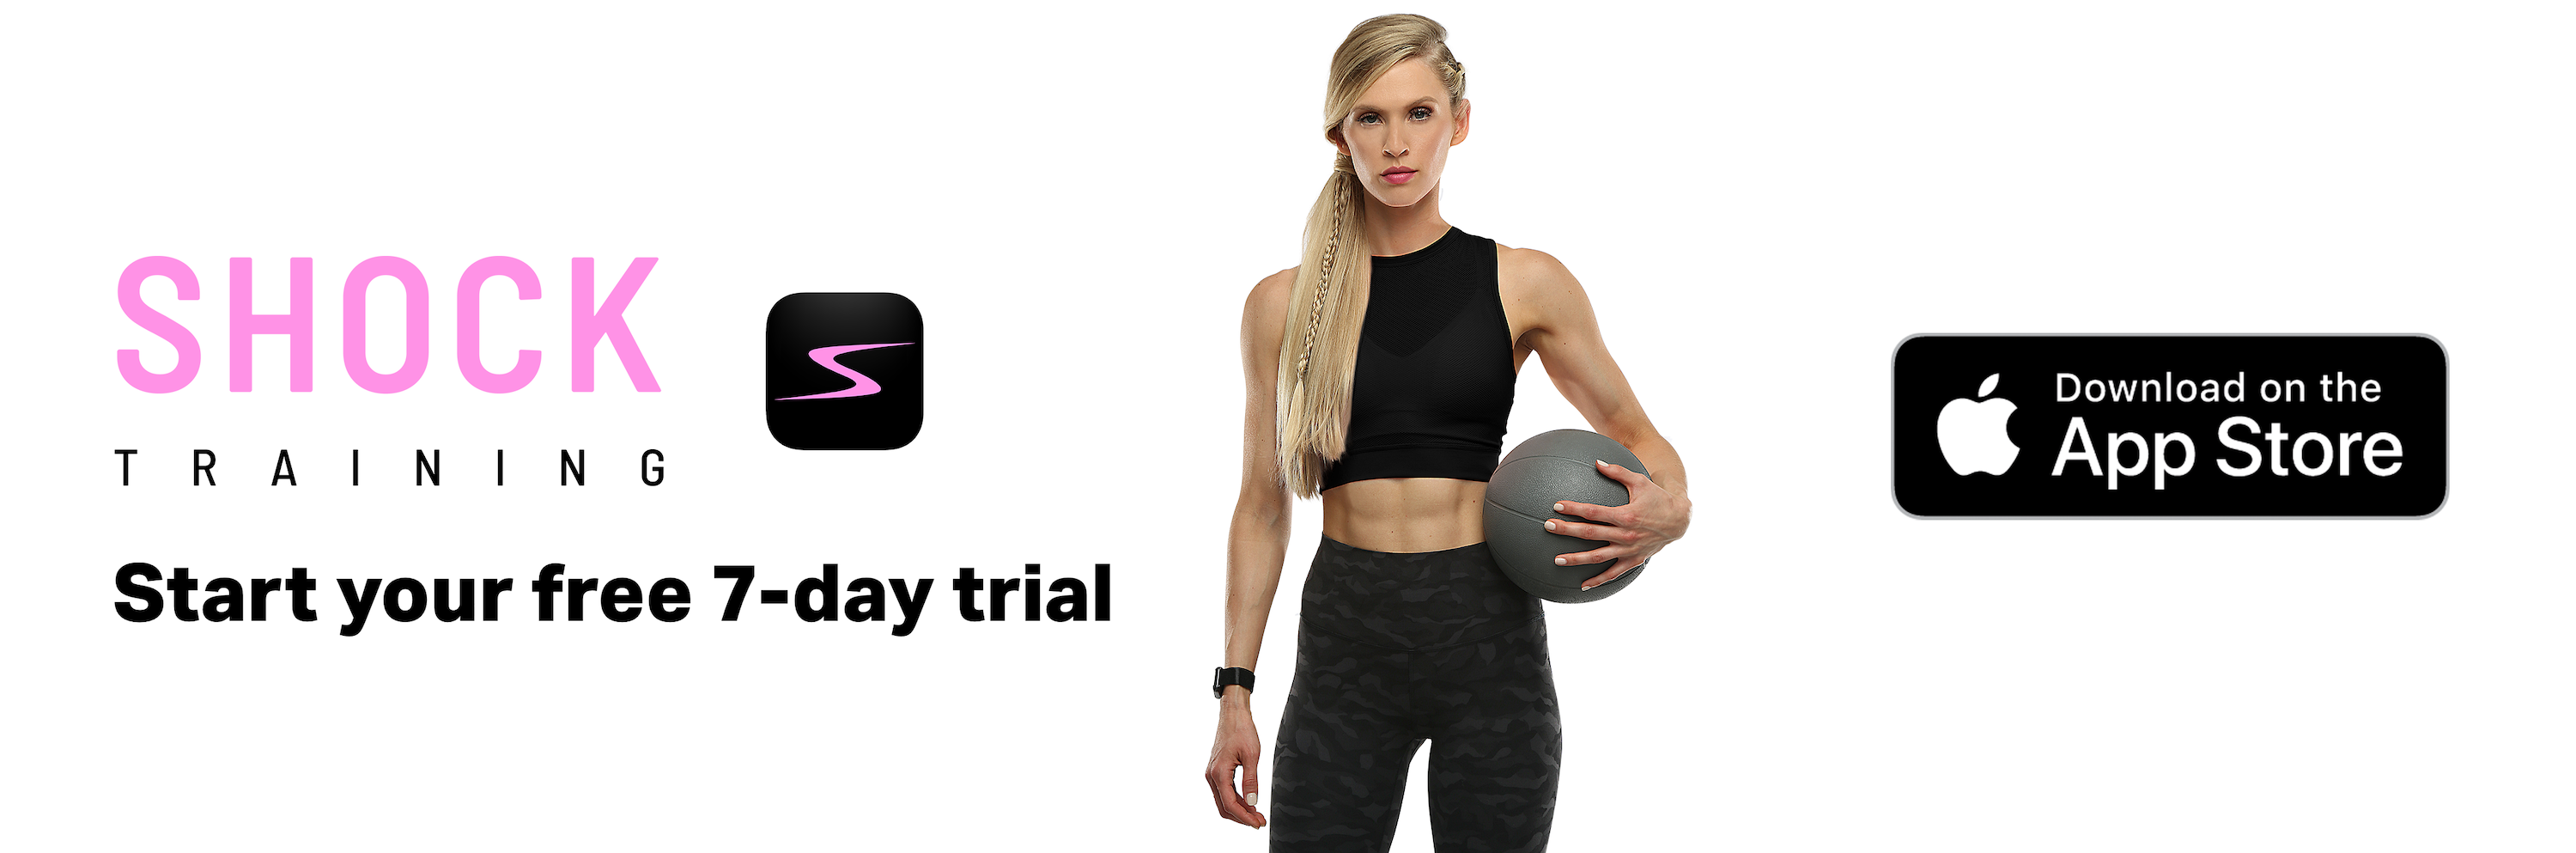 SHOCK gives women a new way to get fit, tone up, and build muscle.